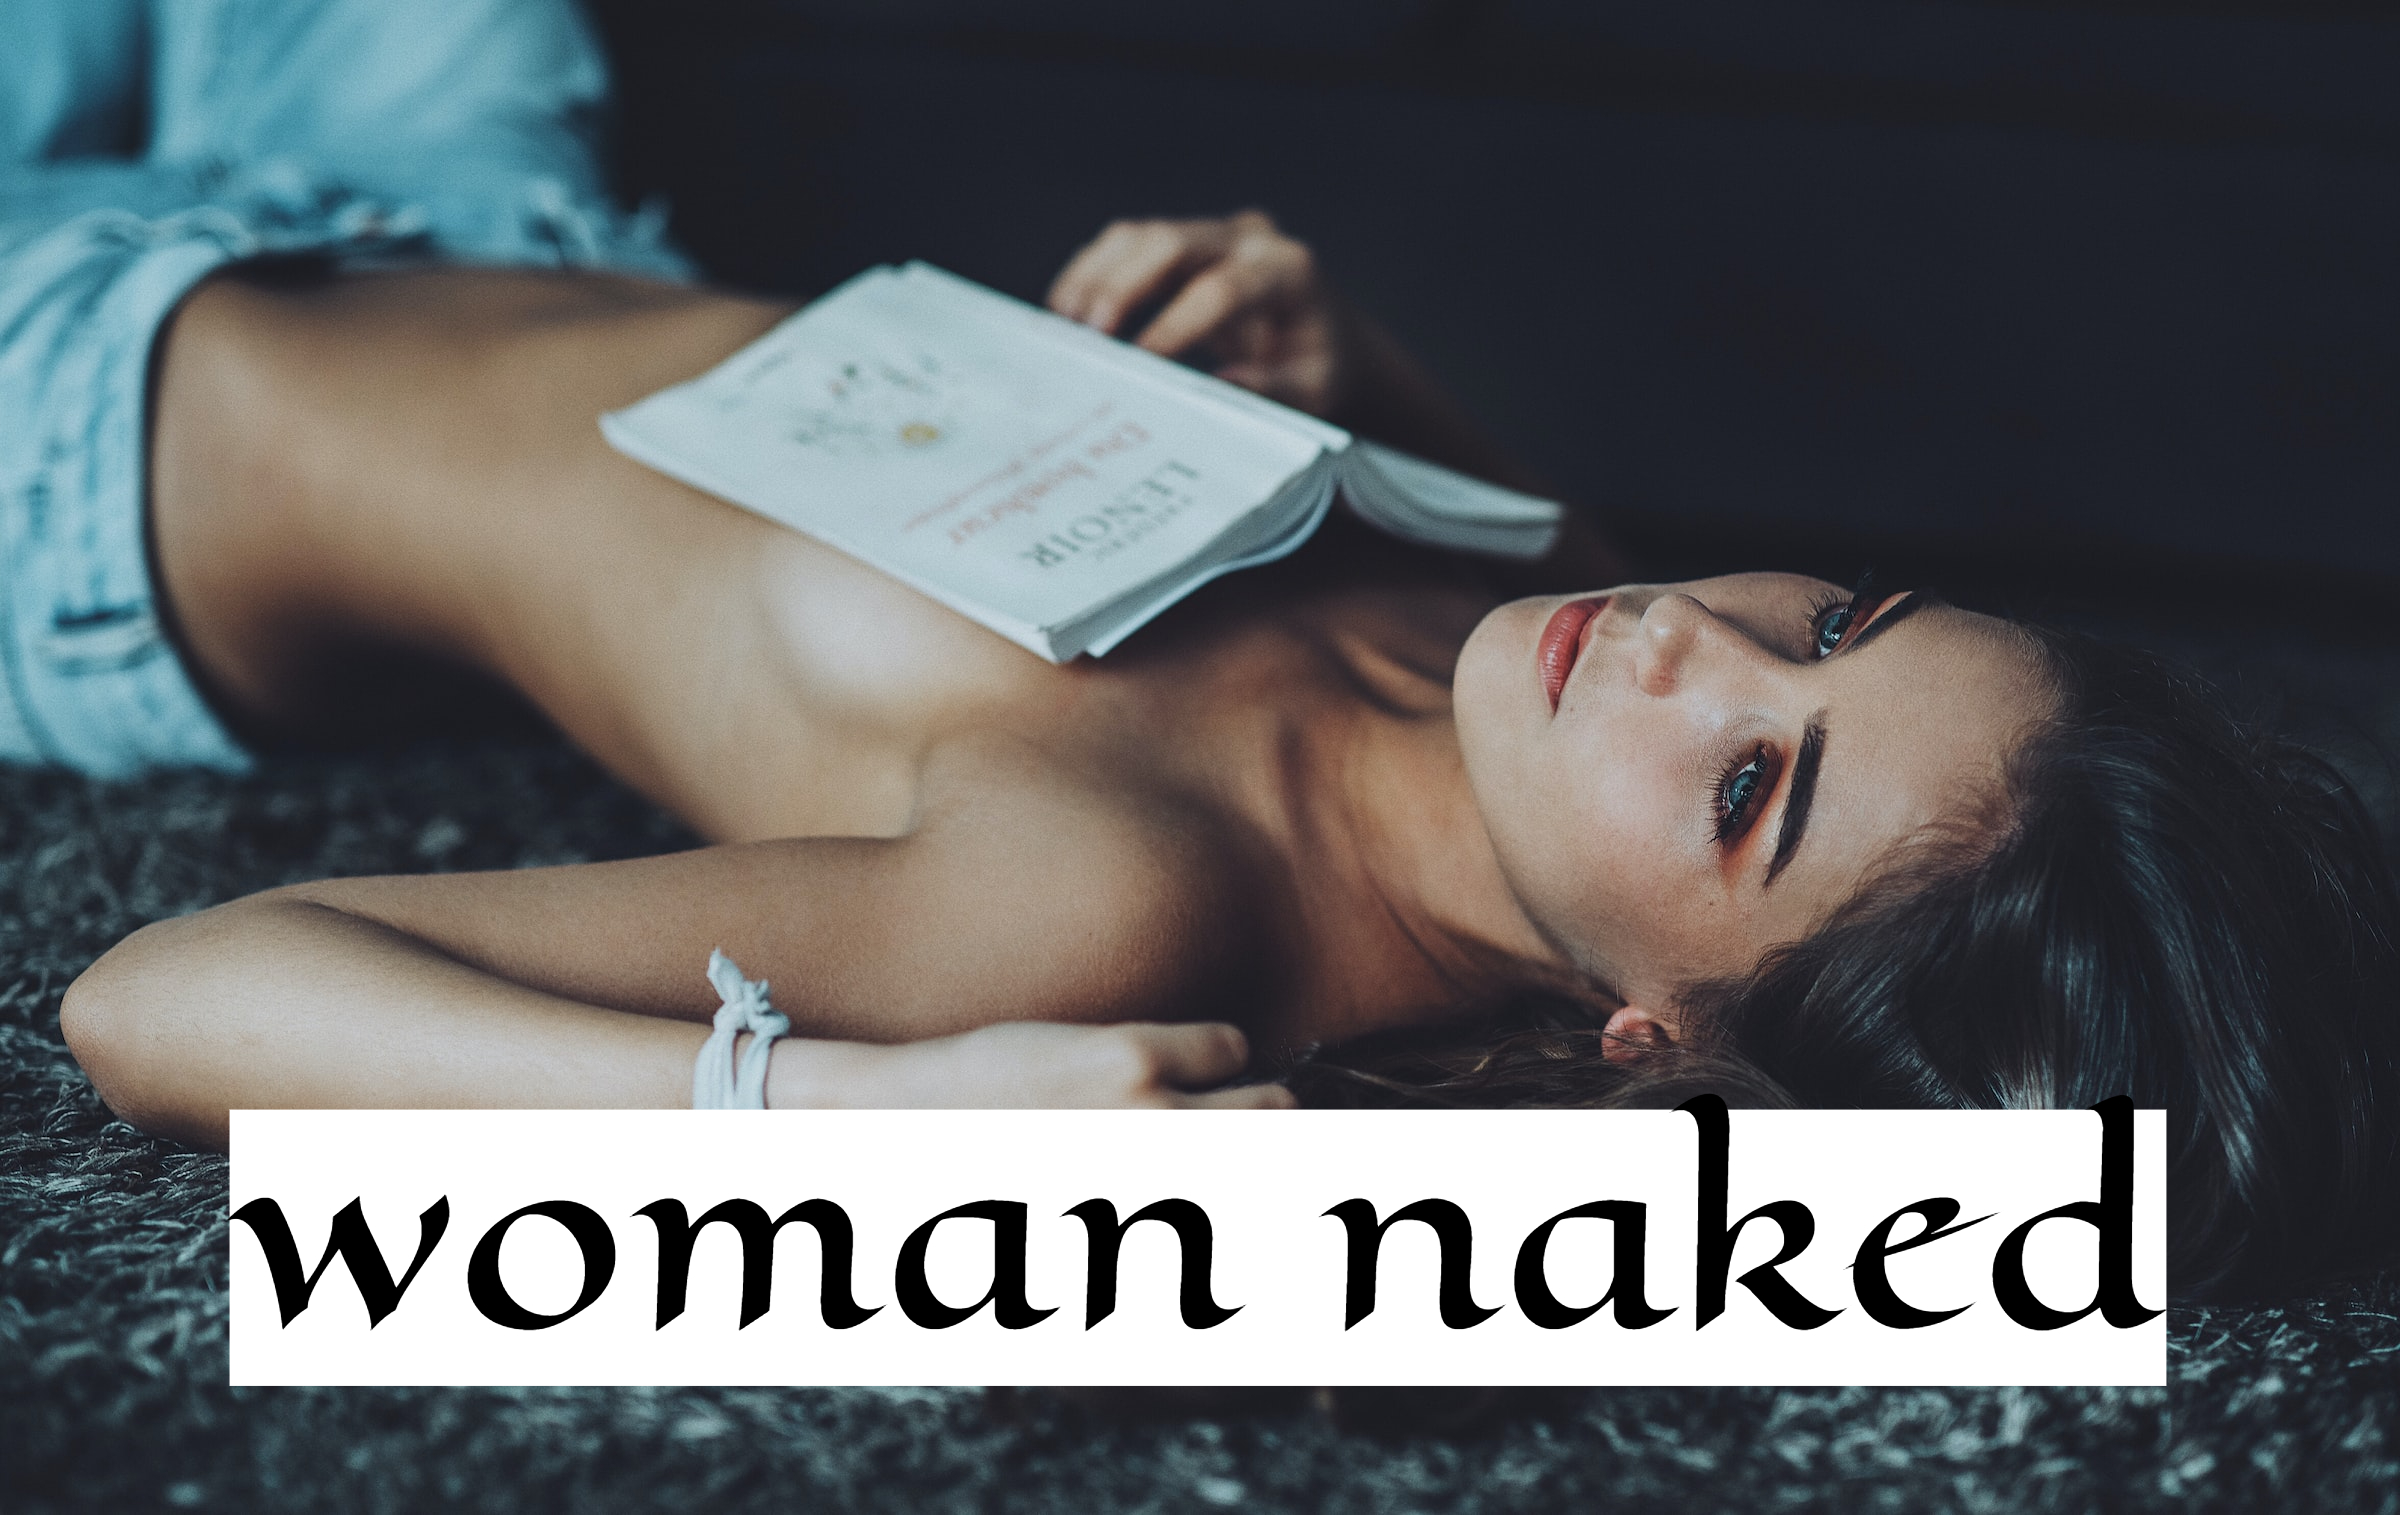 Woman Naked - Dream Meaning & Secret Desires